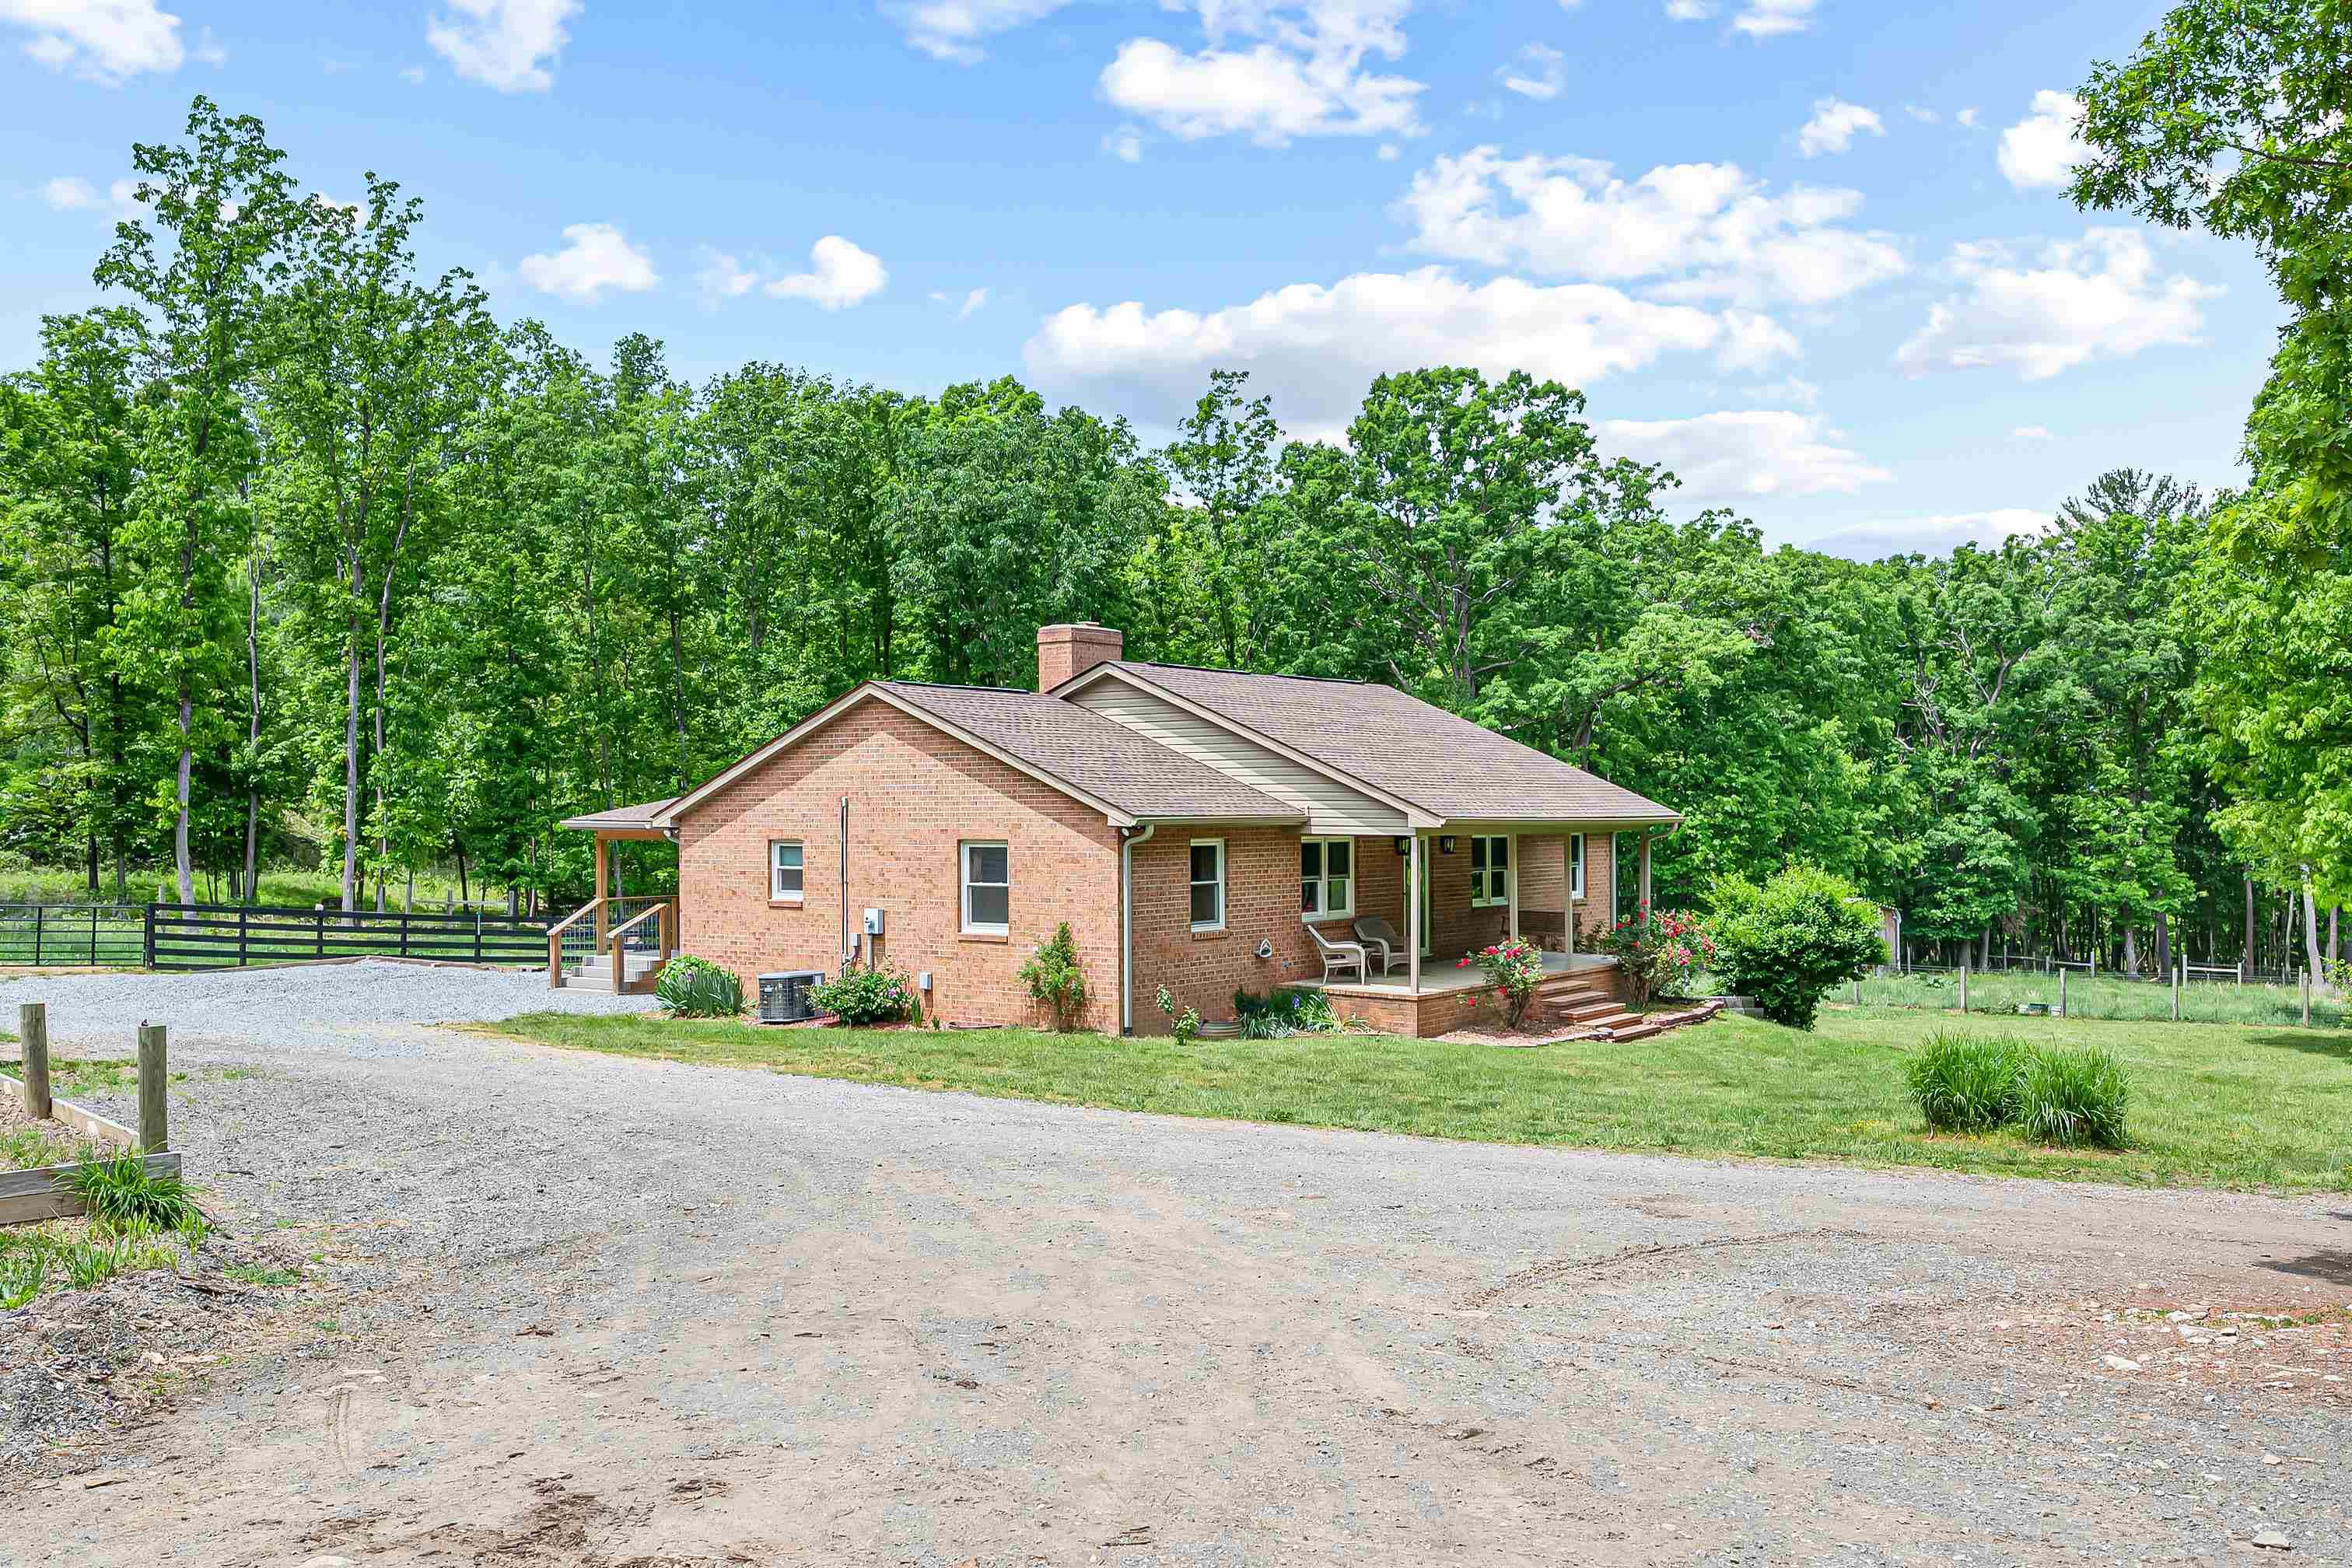 This 4 bed 2 1/2 bath brick ranch sits on a level and secluded 6.4 acre lot that is conveniently located directly between the amenities offered by the New River and Roanoke valleys. This property would make a great setting for a mini farm as it features fenced pasture acreage, multiple out buildings+sheds, a large pole barn great for storage and multiple places for equipment! There would be plenty of room for chickens, goats, sheep, and even horses. The front porch and covered back deck make for welcoming entry's to the home and are perfect for relaxing, spending time outdoors, or hosting guests in this tranquil setting. Once indoors the cozy fire place w/ gas logs, custom master bath, finished walk out basement, large bed rooms, and functional floor plan make for a great home!